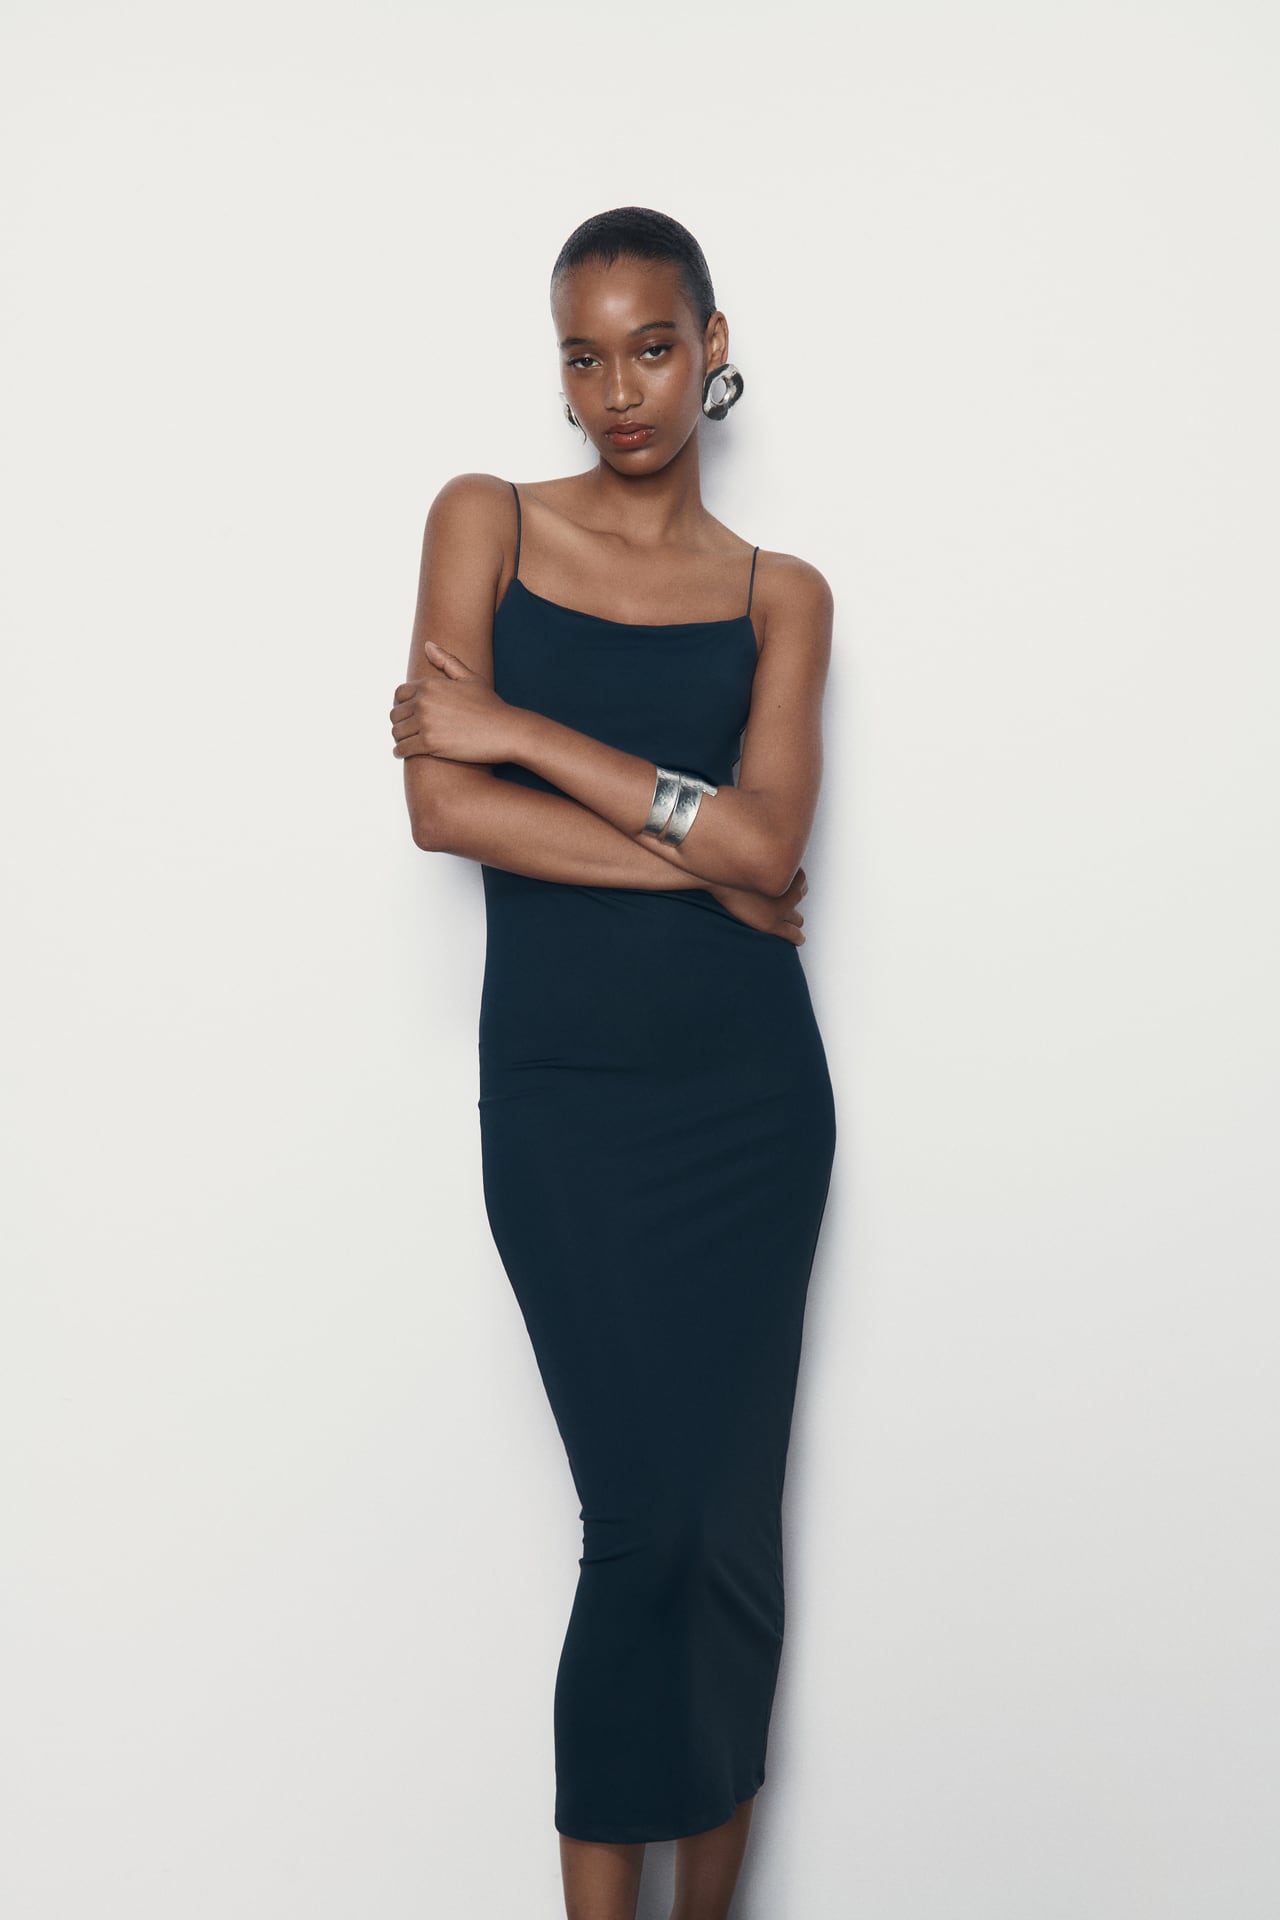 Zara Best Sellers: The 8 Pieces Everyone Wants Right Now | Who What Wear UK